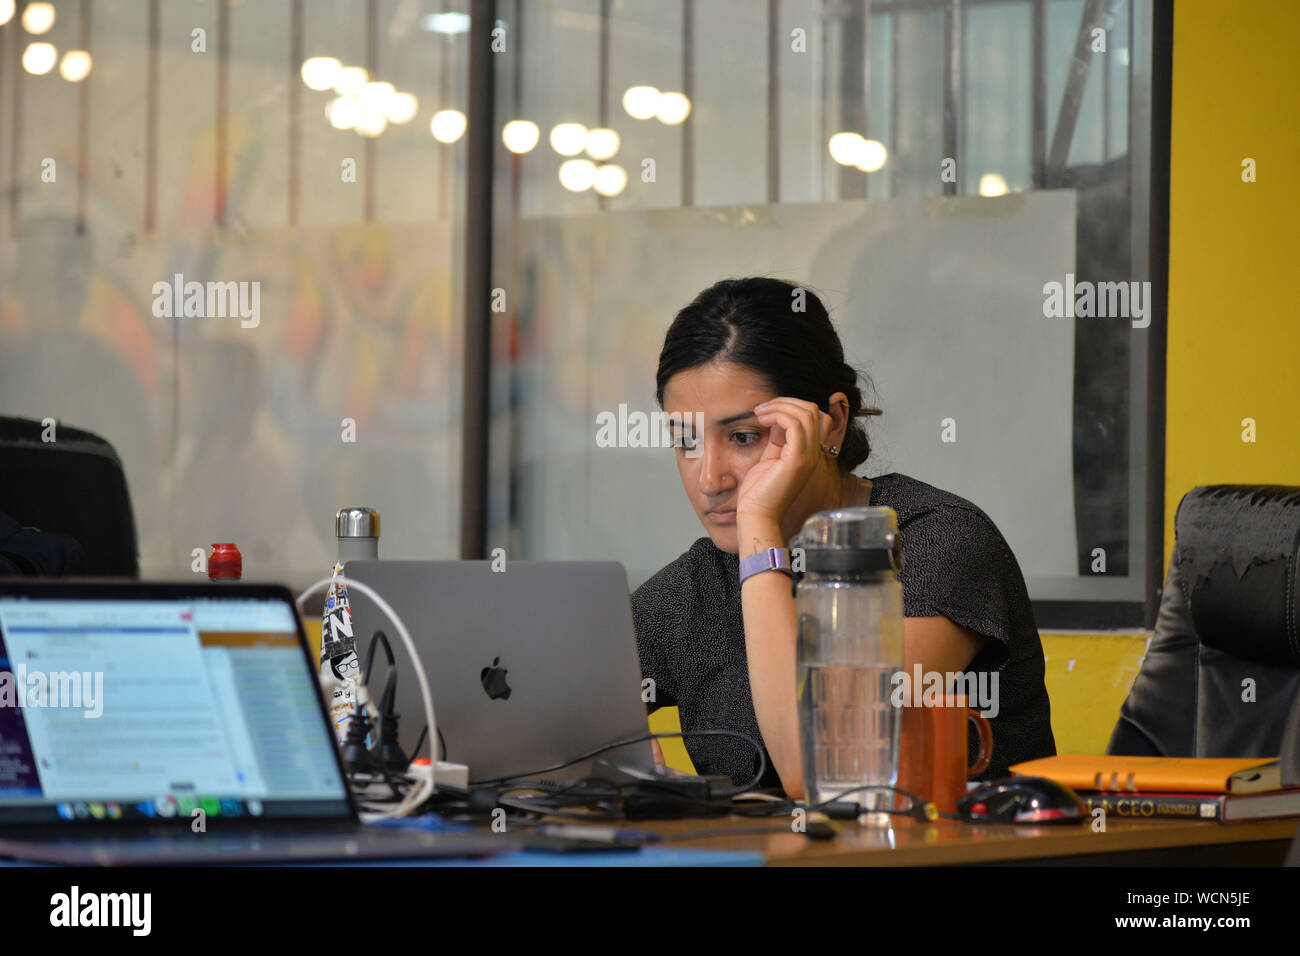 (190828) -- GAZA, Aug. 28, 2019 (Xinhua) -- A woman works inside Gaza Sky Geeks, one of several local innovation hubs in the Gaza Strip, on Aug. 26, 2019. Hundreds of small business ideas come up in the West Bank and Gaza Strip, but only a small number of them flourishes and continues due to the limitations in the supporting eco-system for the start-ups. TO GO WITH "Feature: Palestinian start-ups see limited growth" (Str/Xinhua) Stock Photo